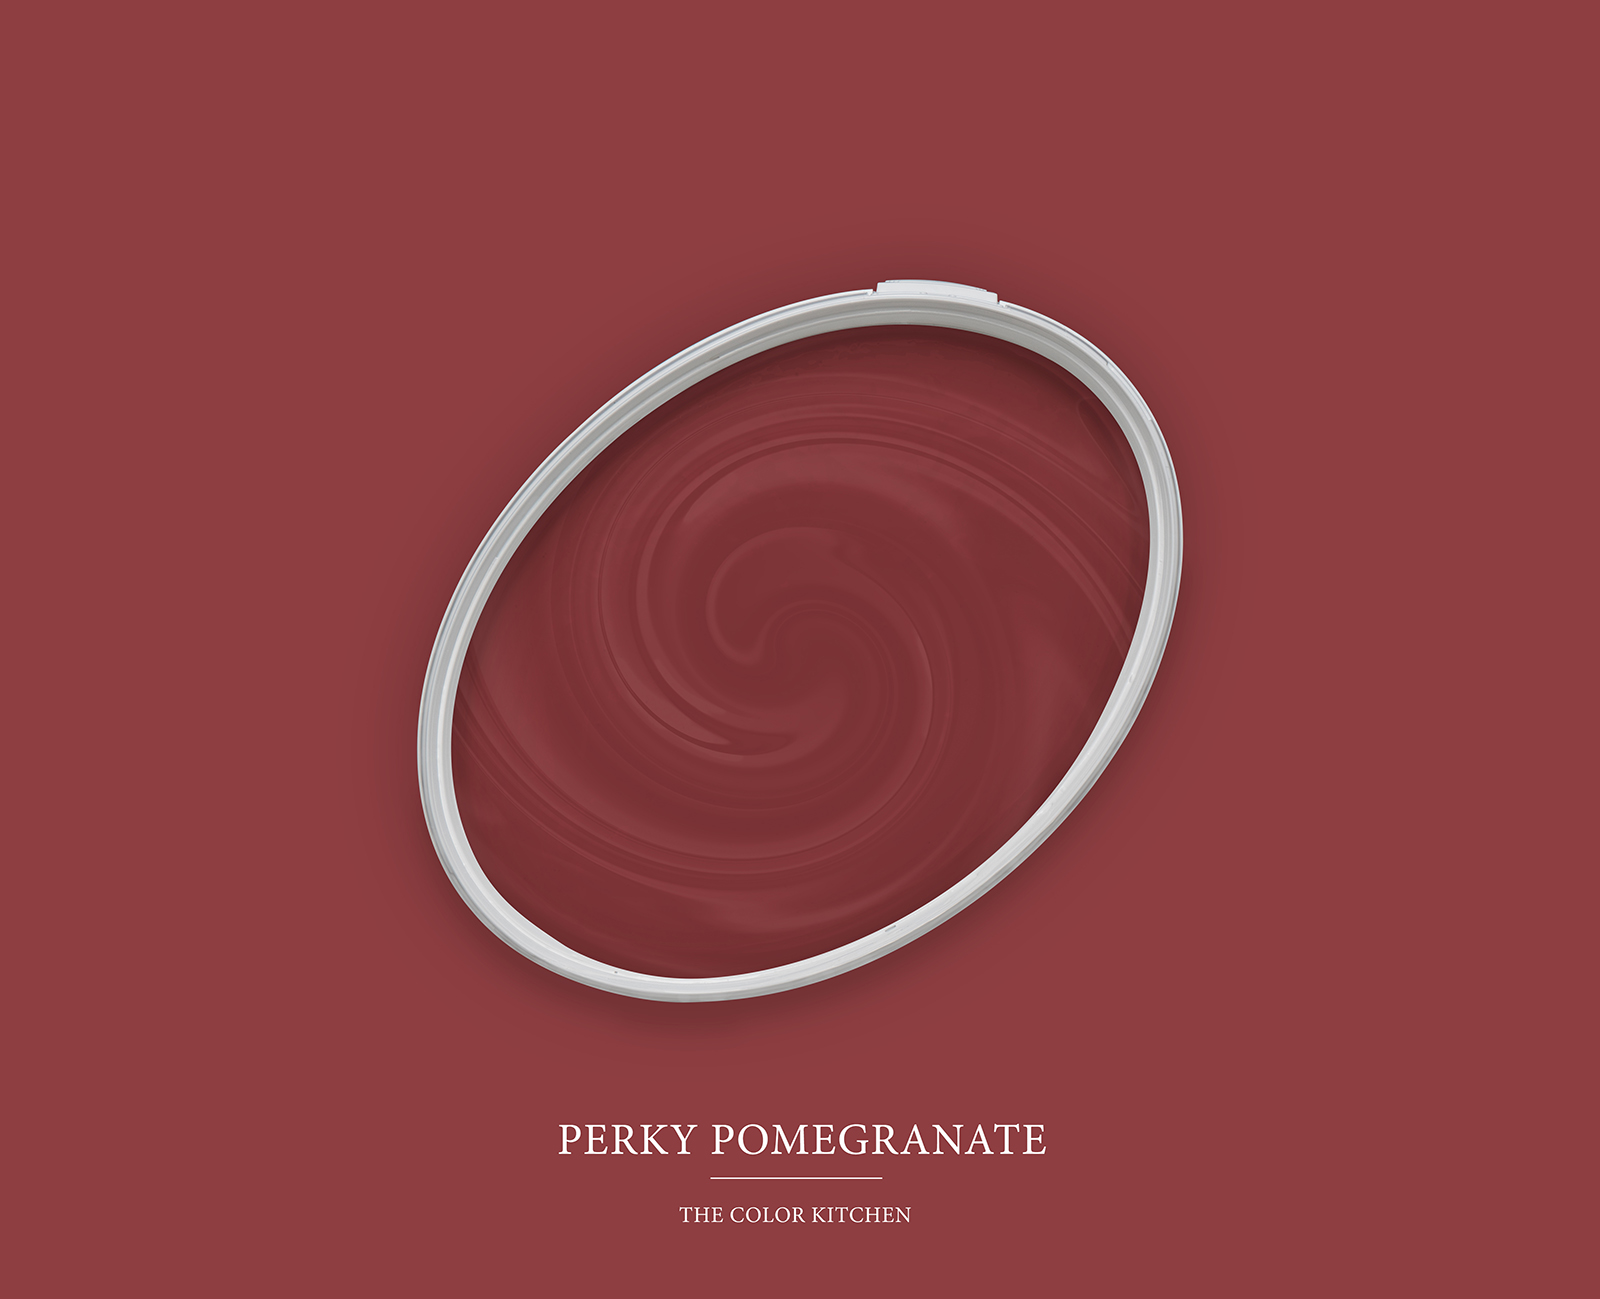 Wall Paint TCK7006 »Perky Pomegranate« in passionate dark red – 5.0 litre
